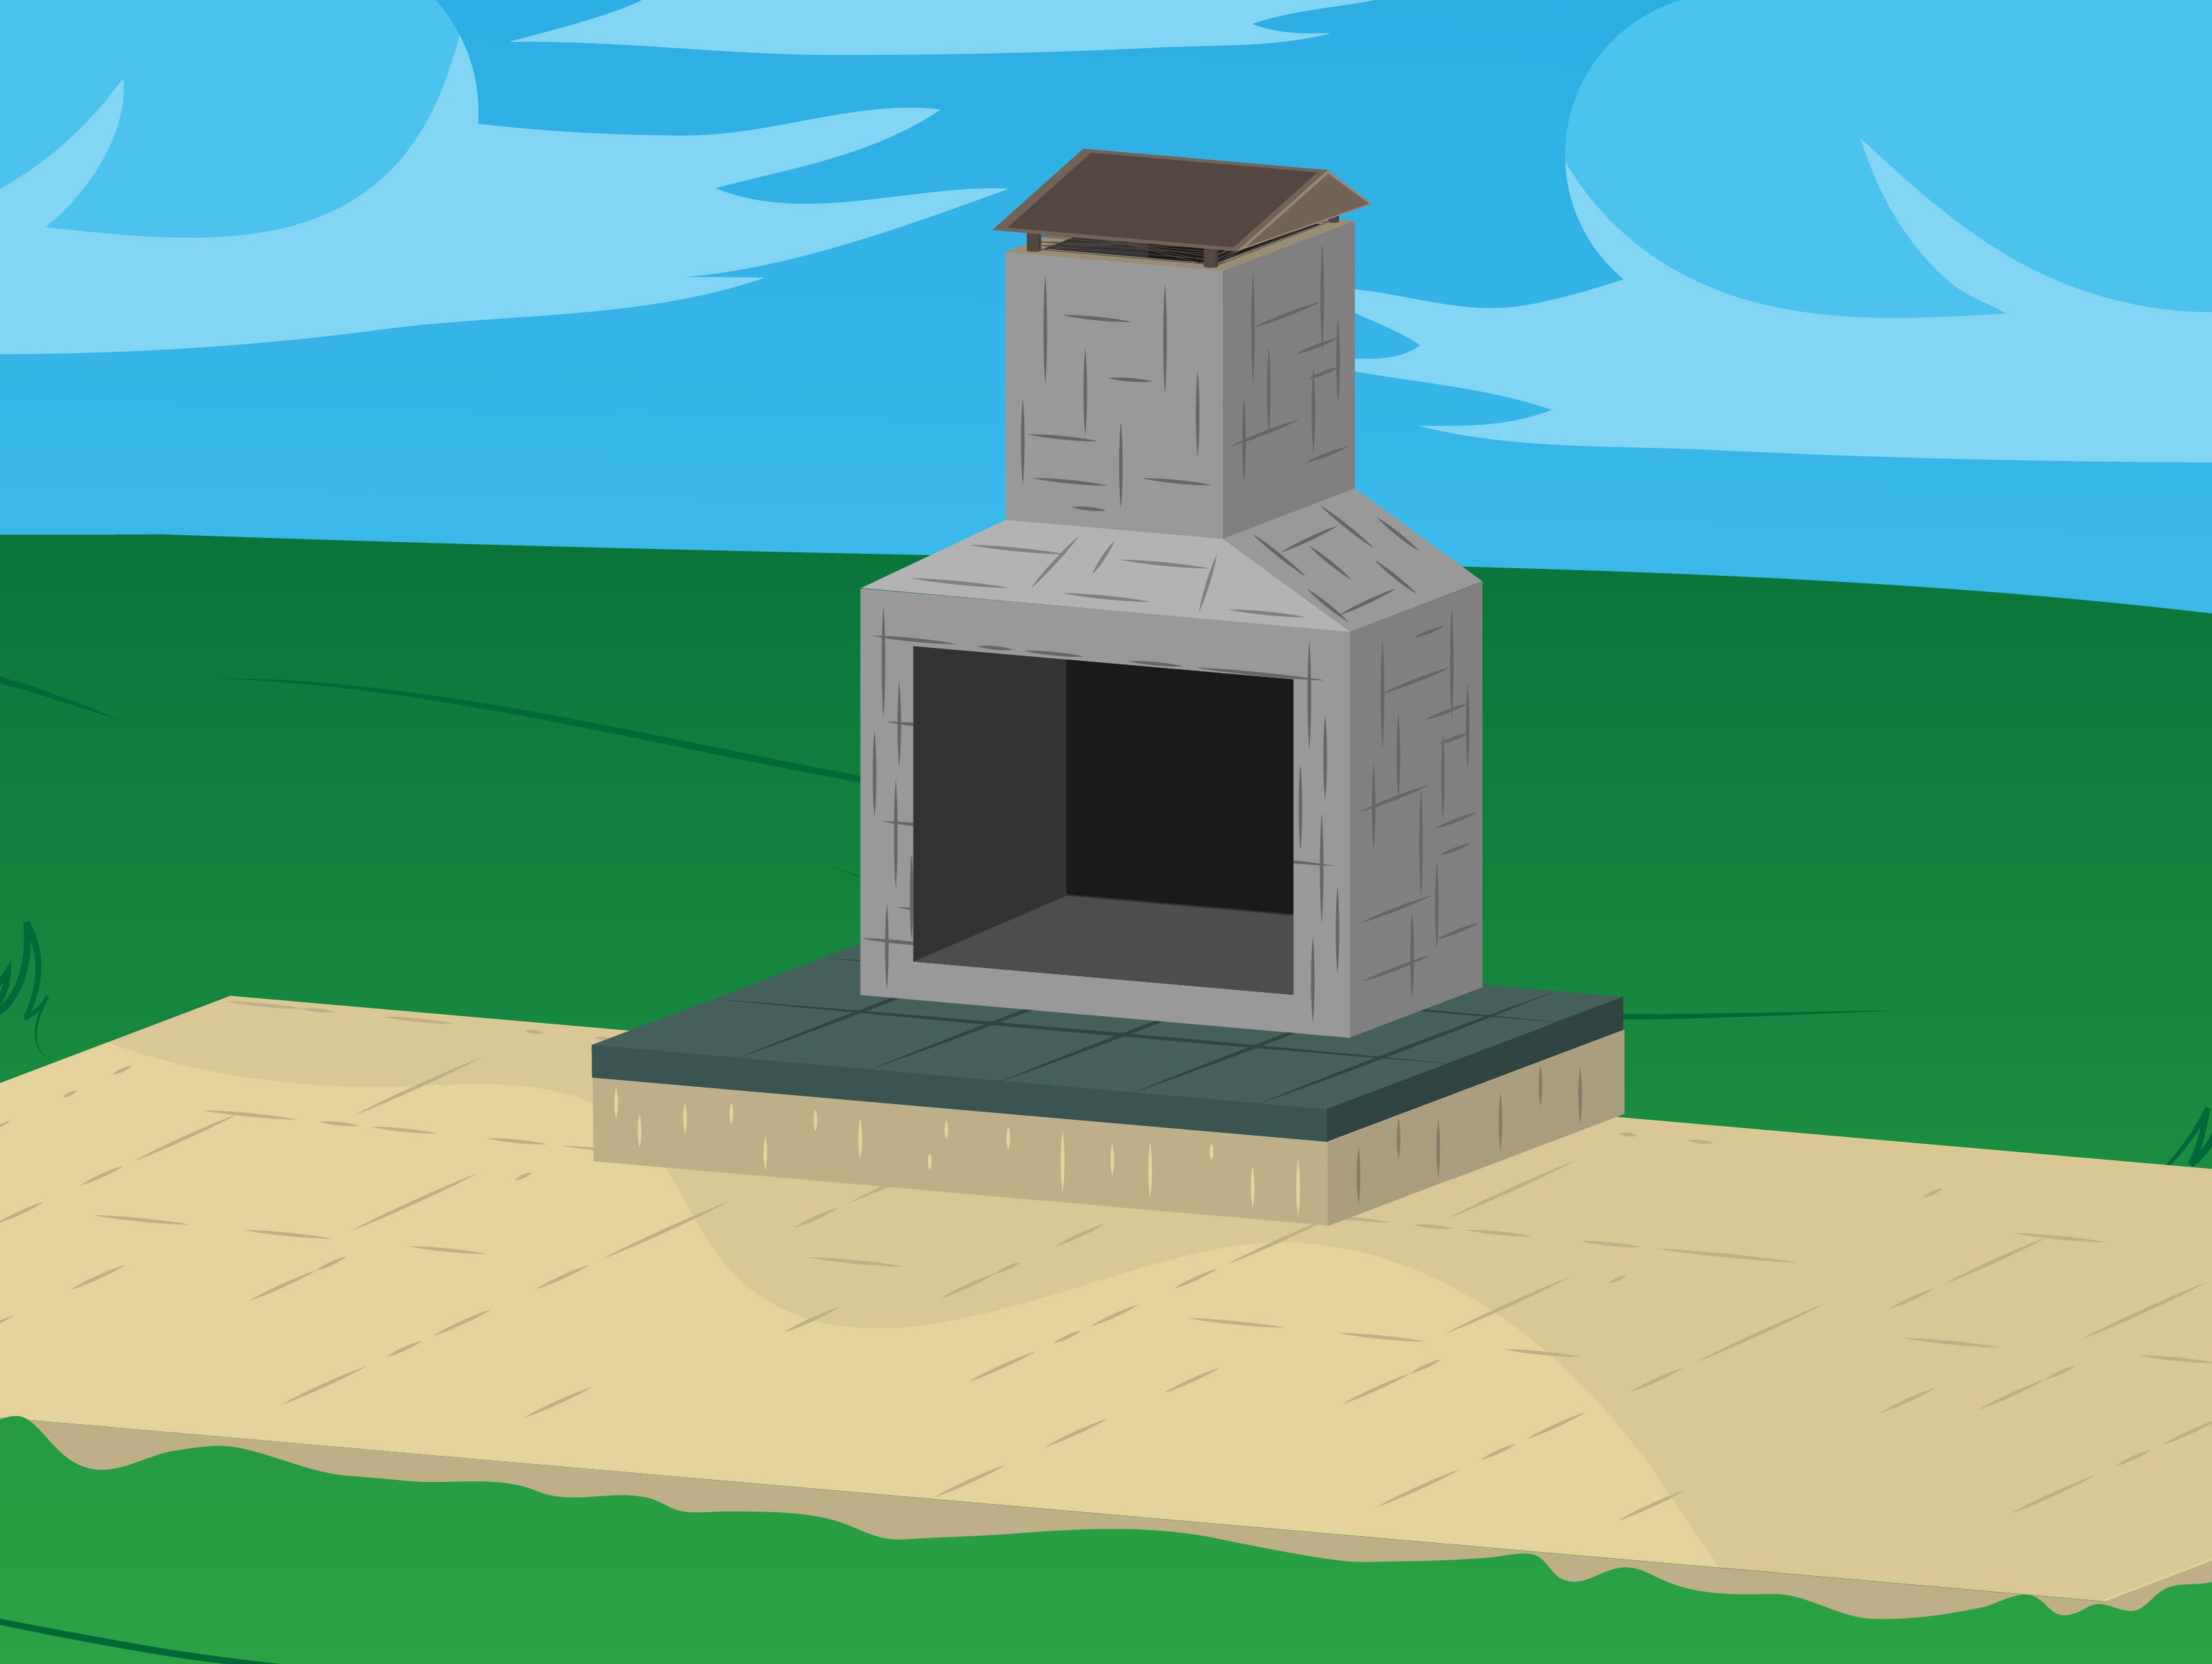 Fireplace Fresh Air Intake Vent Unique How to Build Outdoor Fireplaces with Wikihow